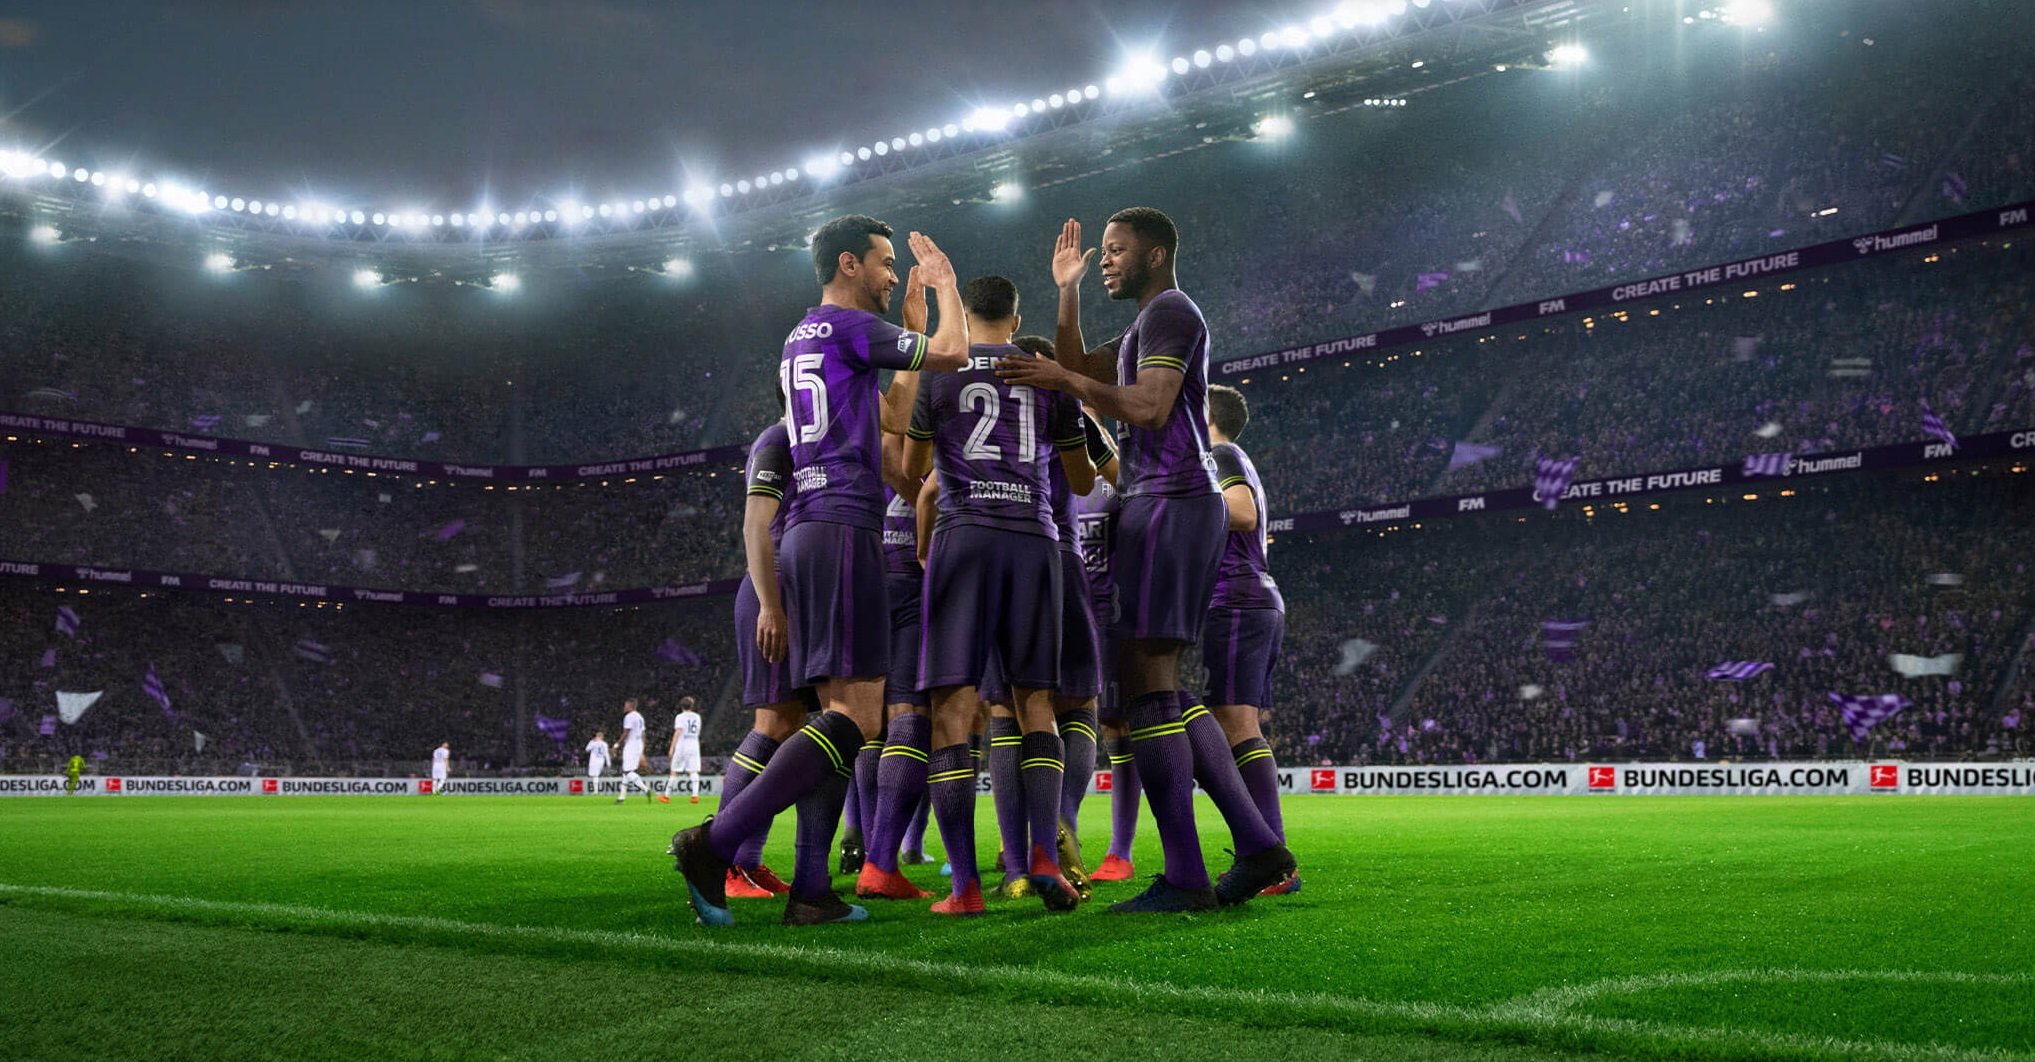 Football Manager 2022 Touch - Other - Sports Interactive Community